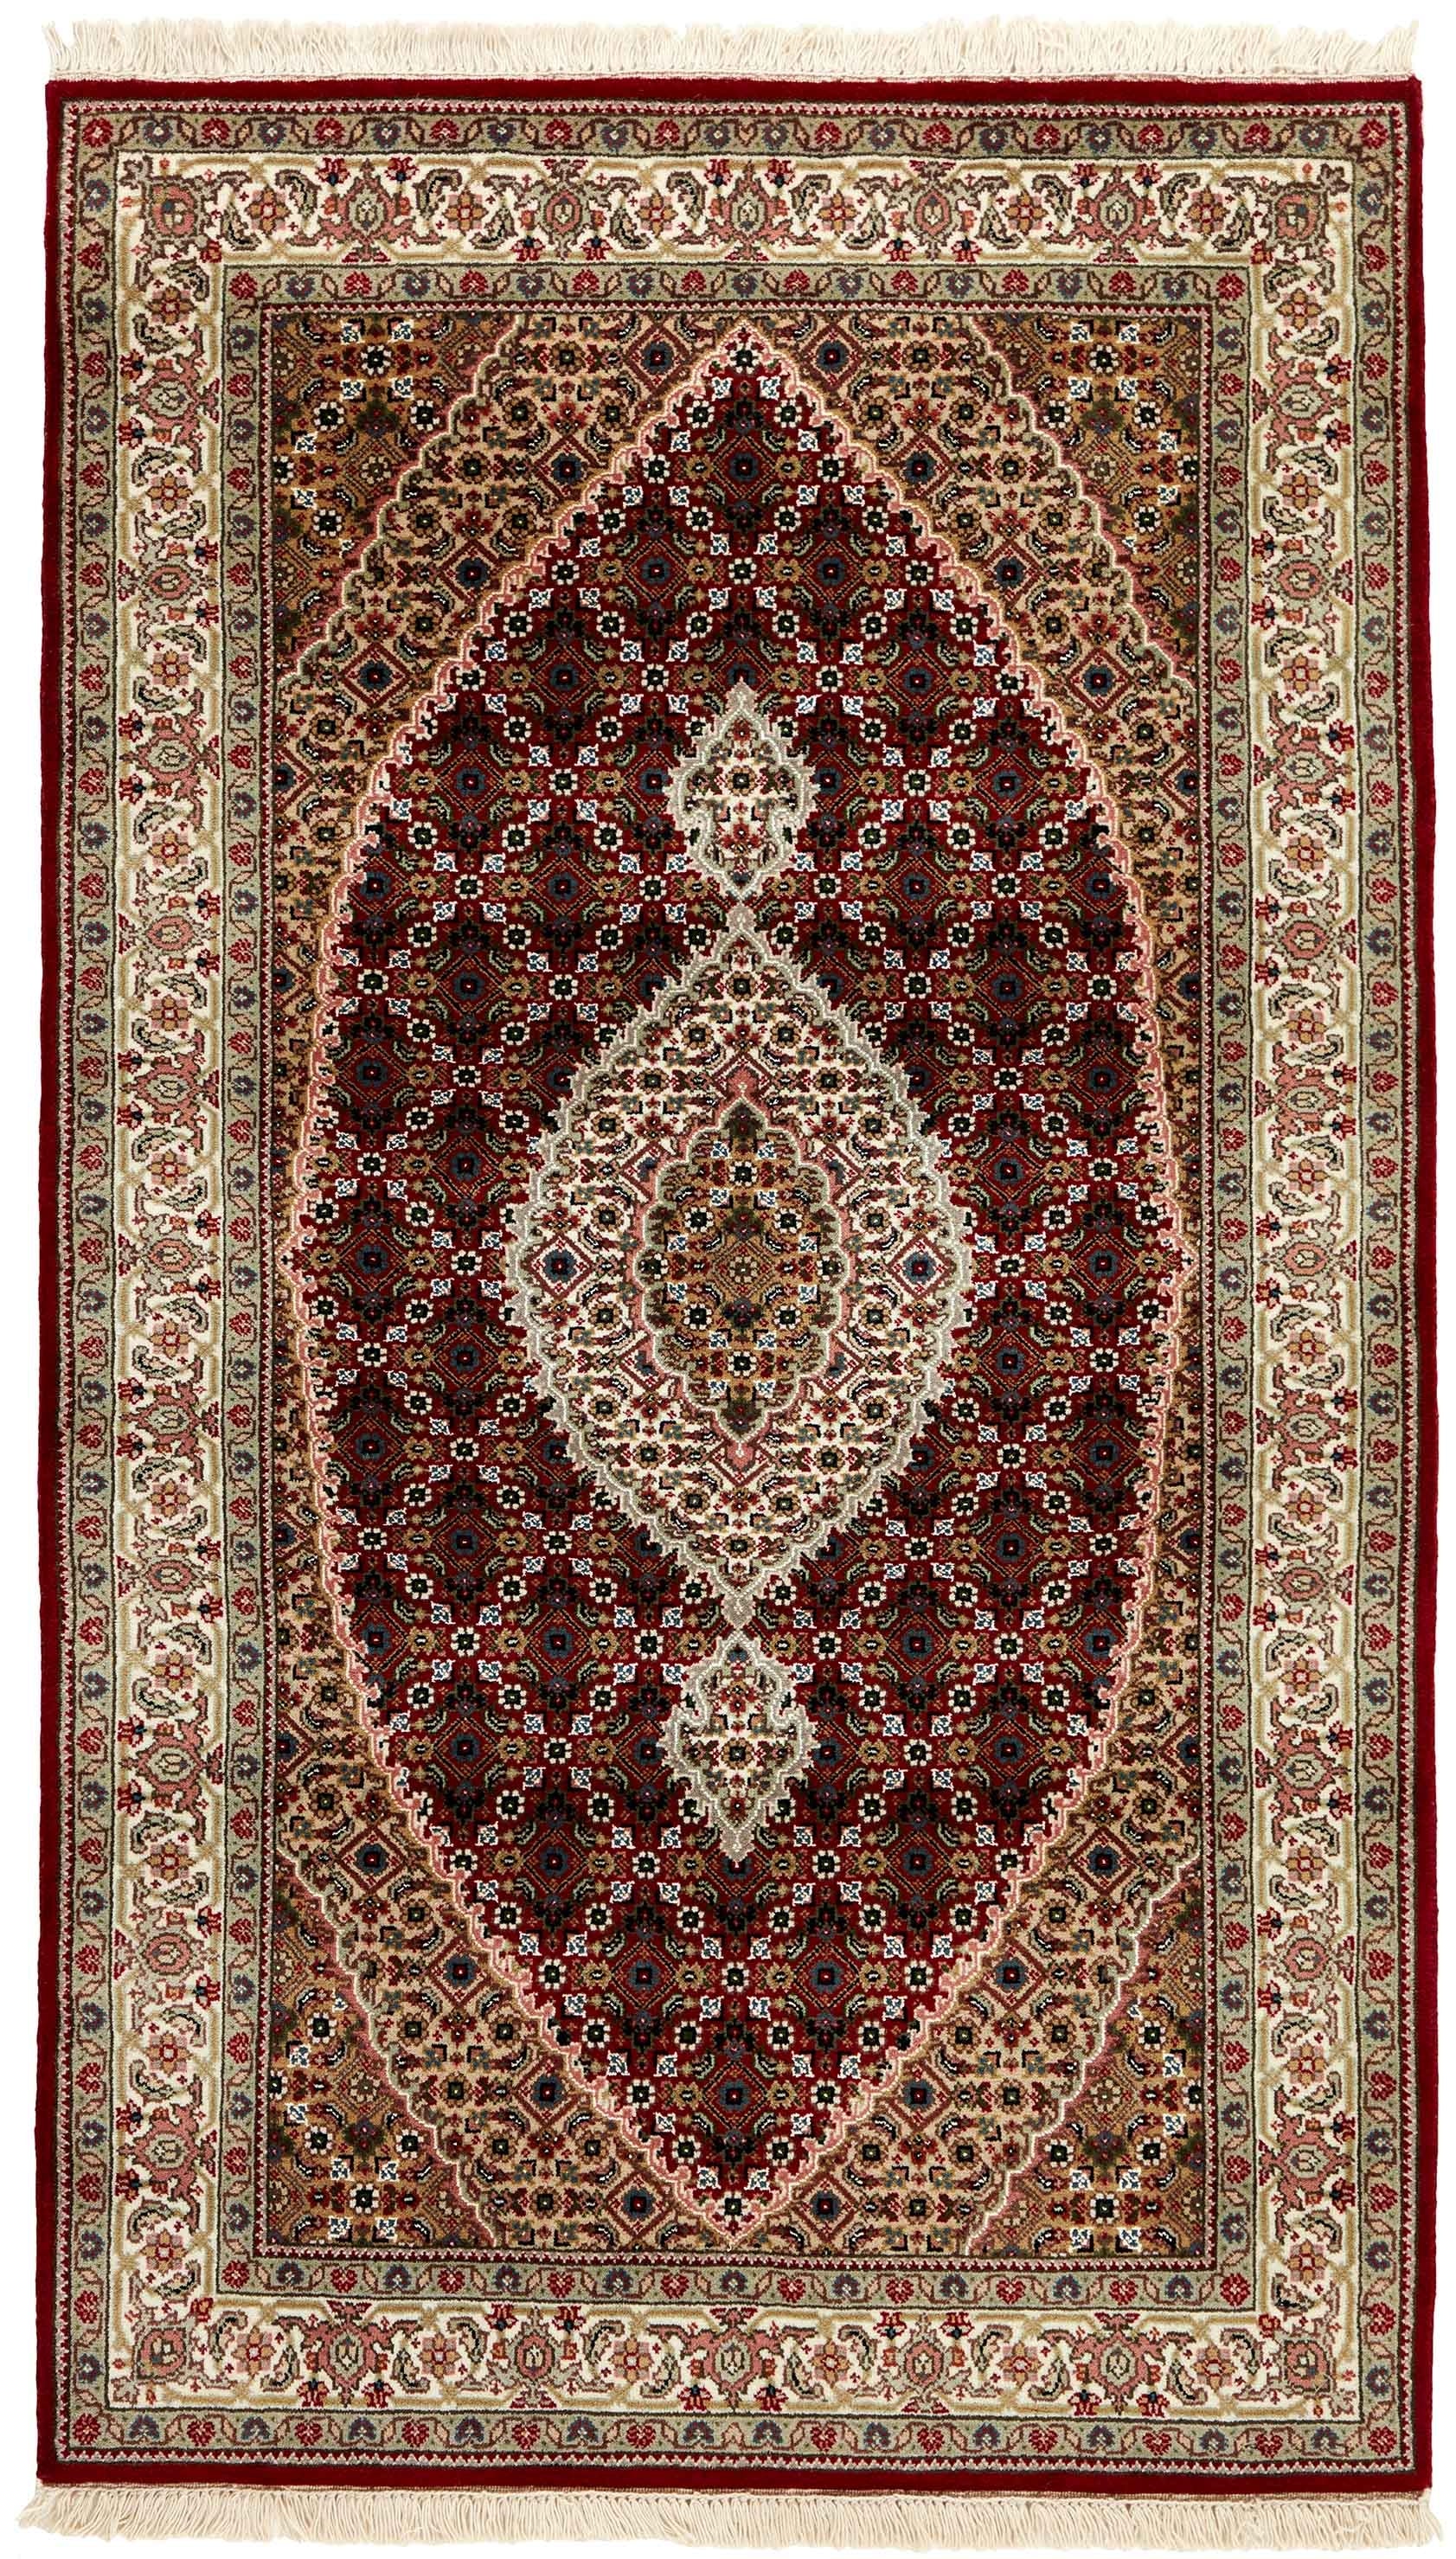 Authentic Oriental rug with traditional geometric and floral design in red, black and beige.